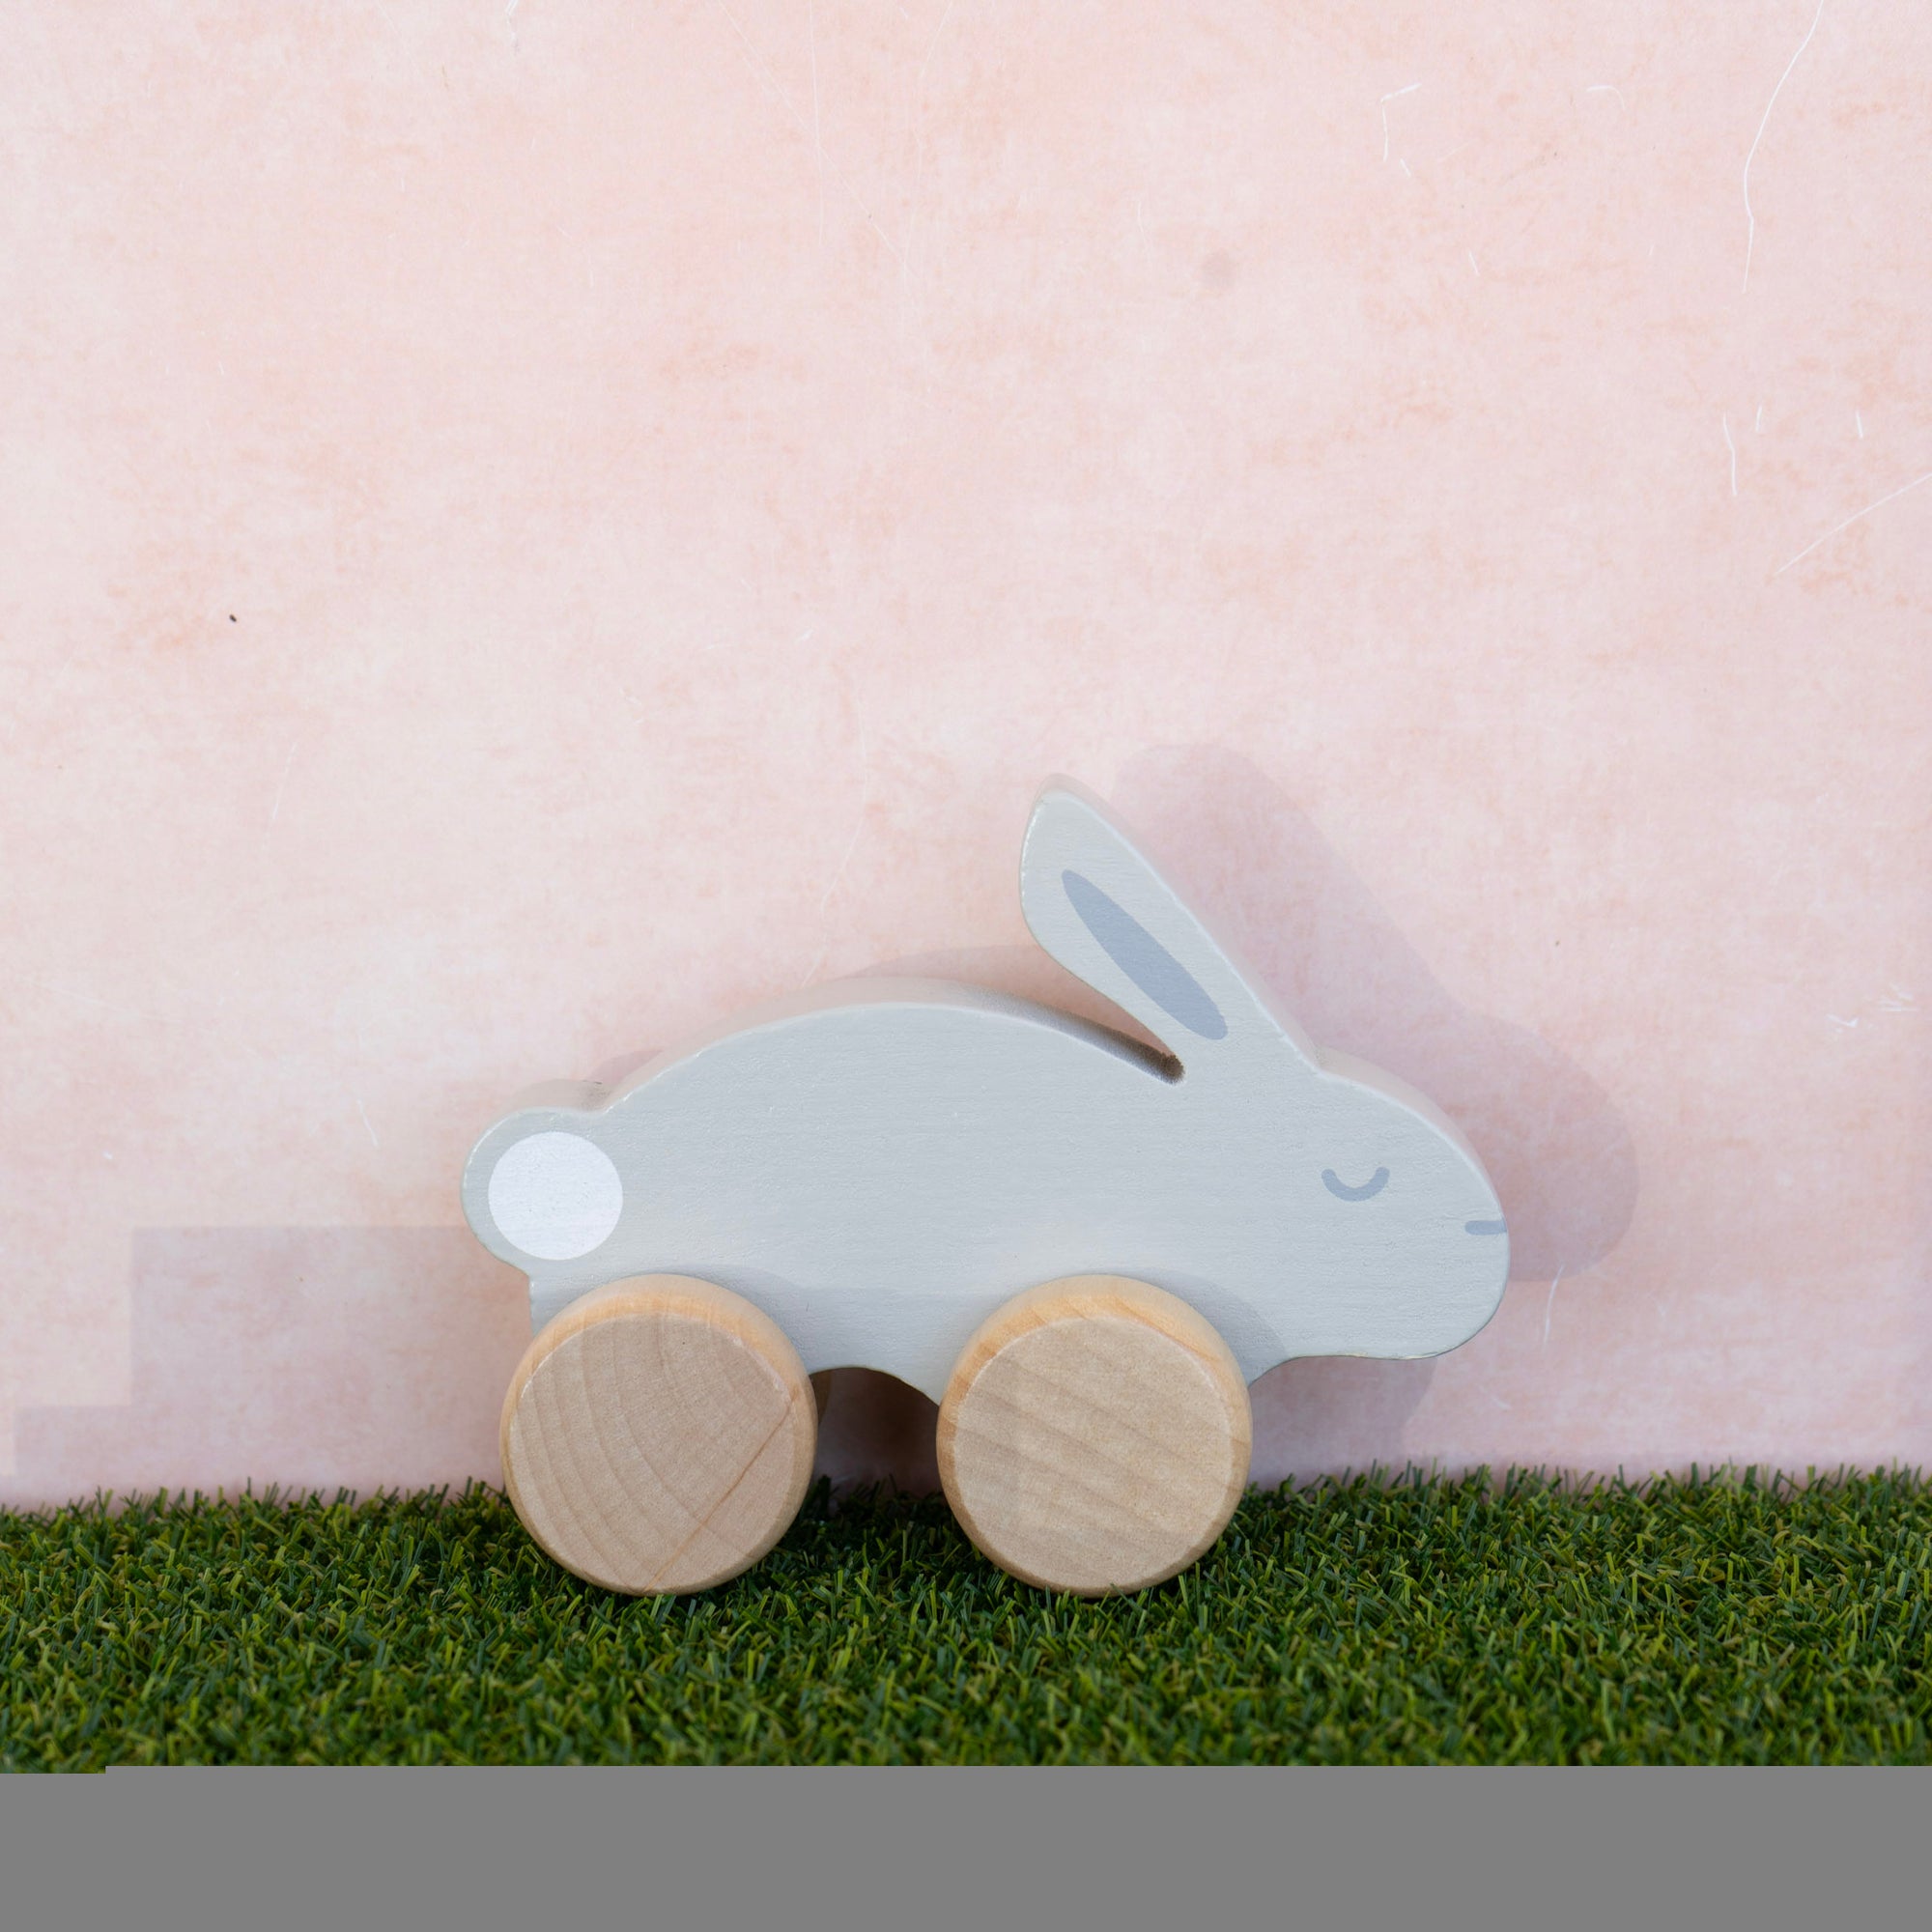 Wooden Toy Bunny